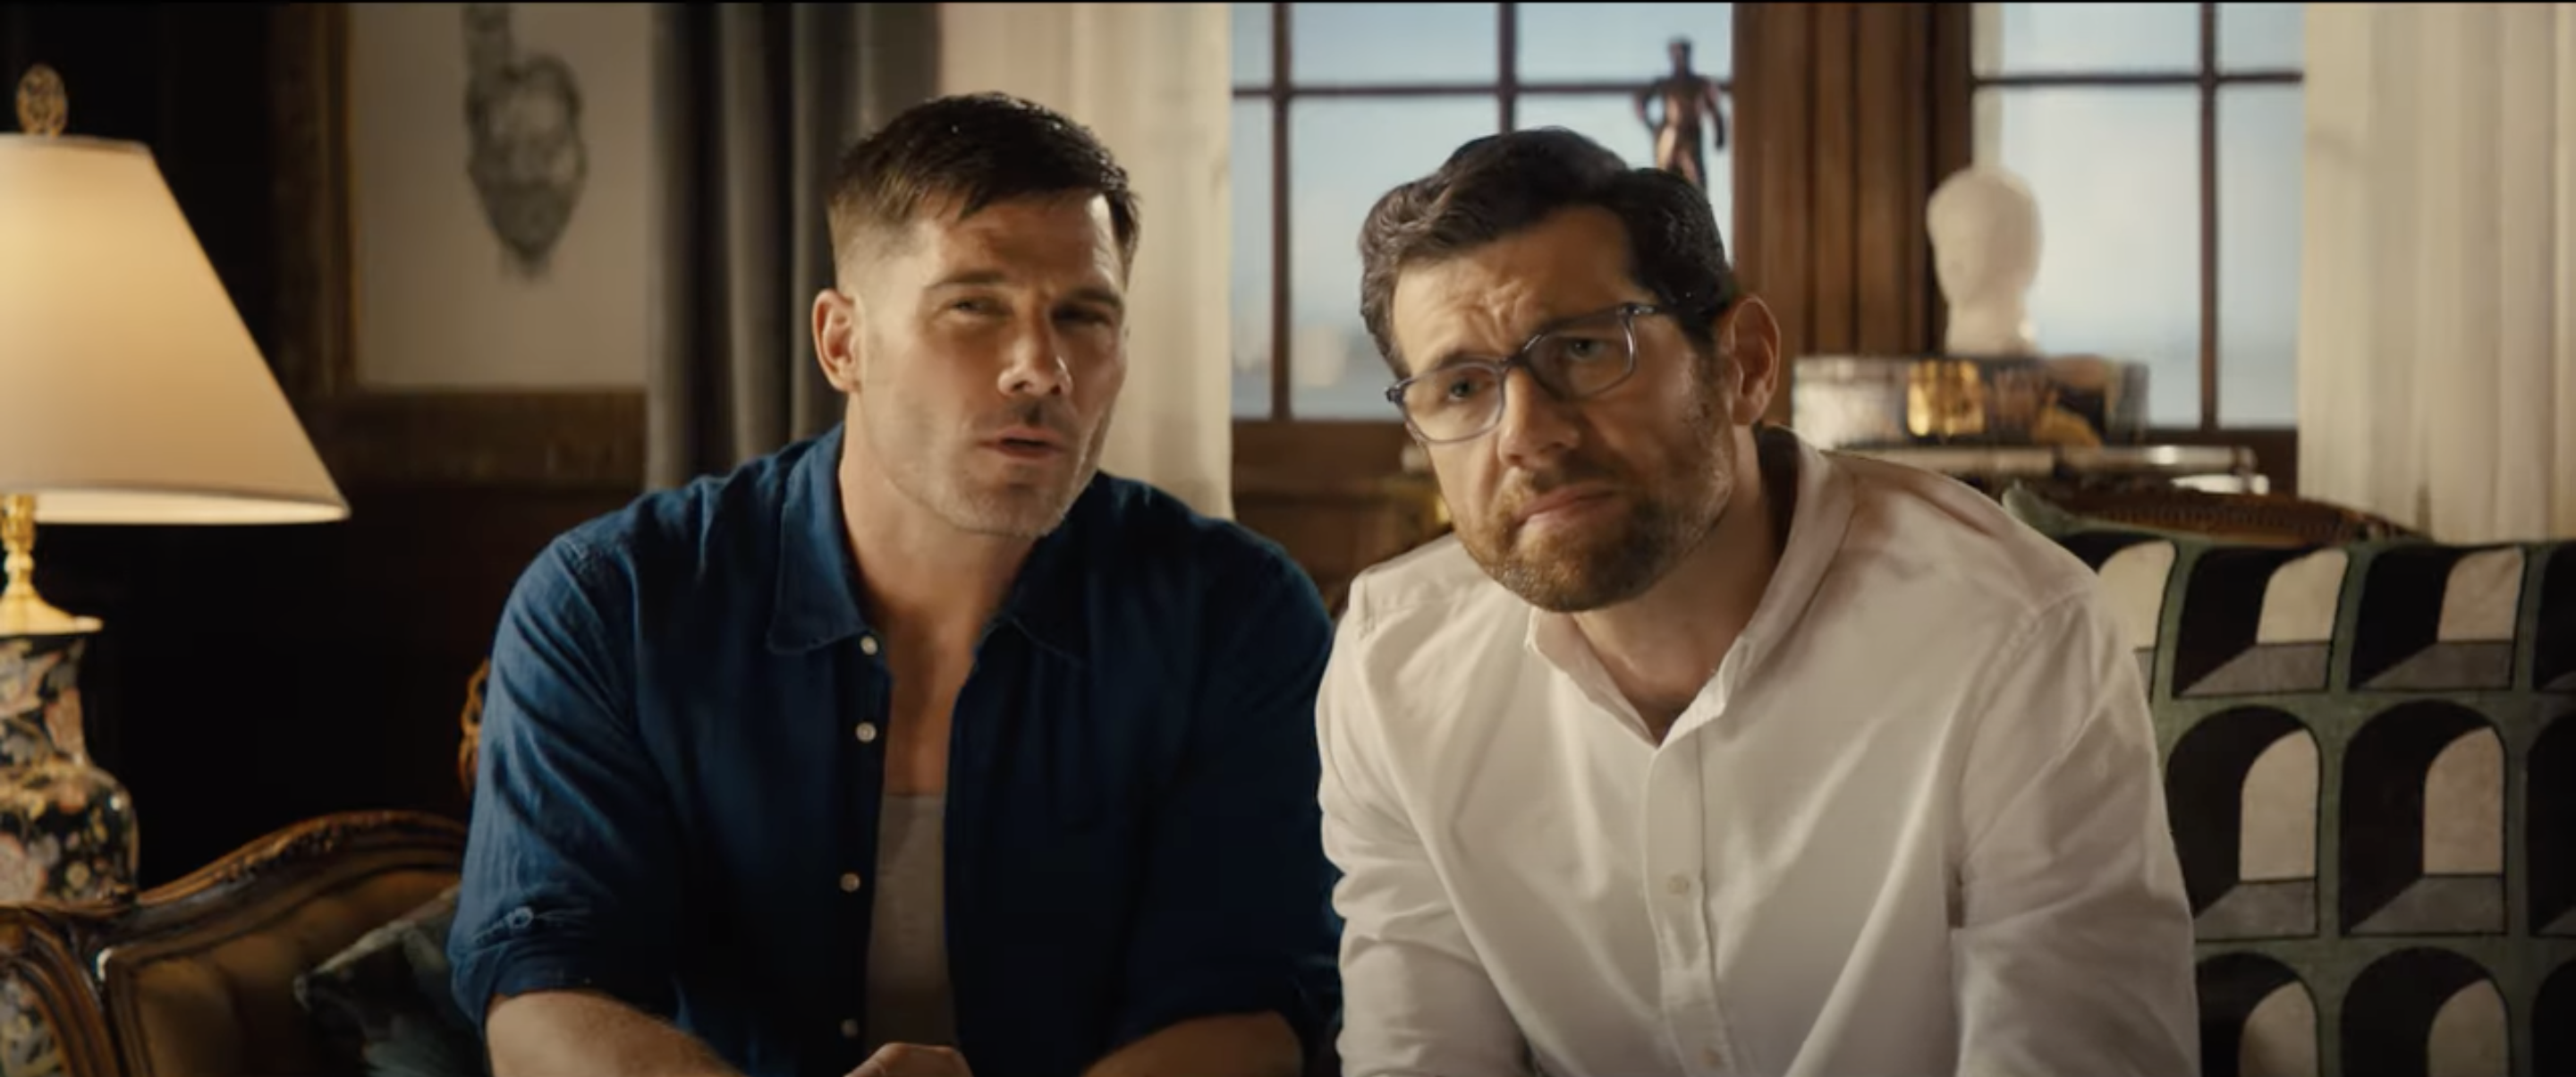 Billy Eichner and Luke Macfarlane in &quot;Bros&quot;